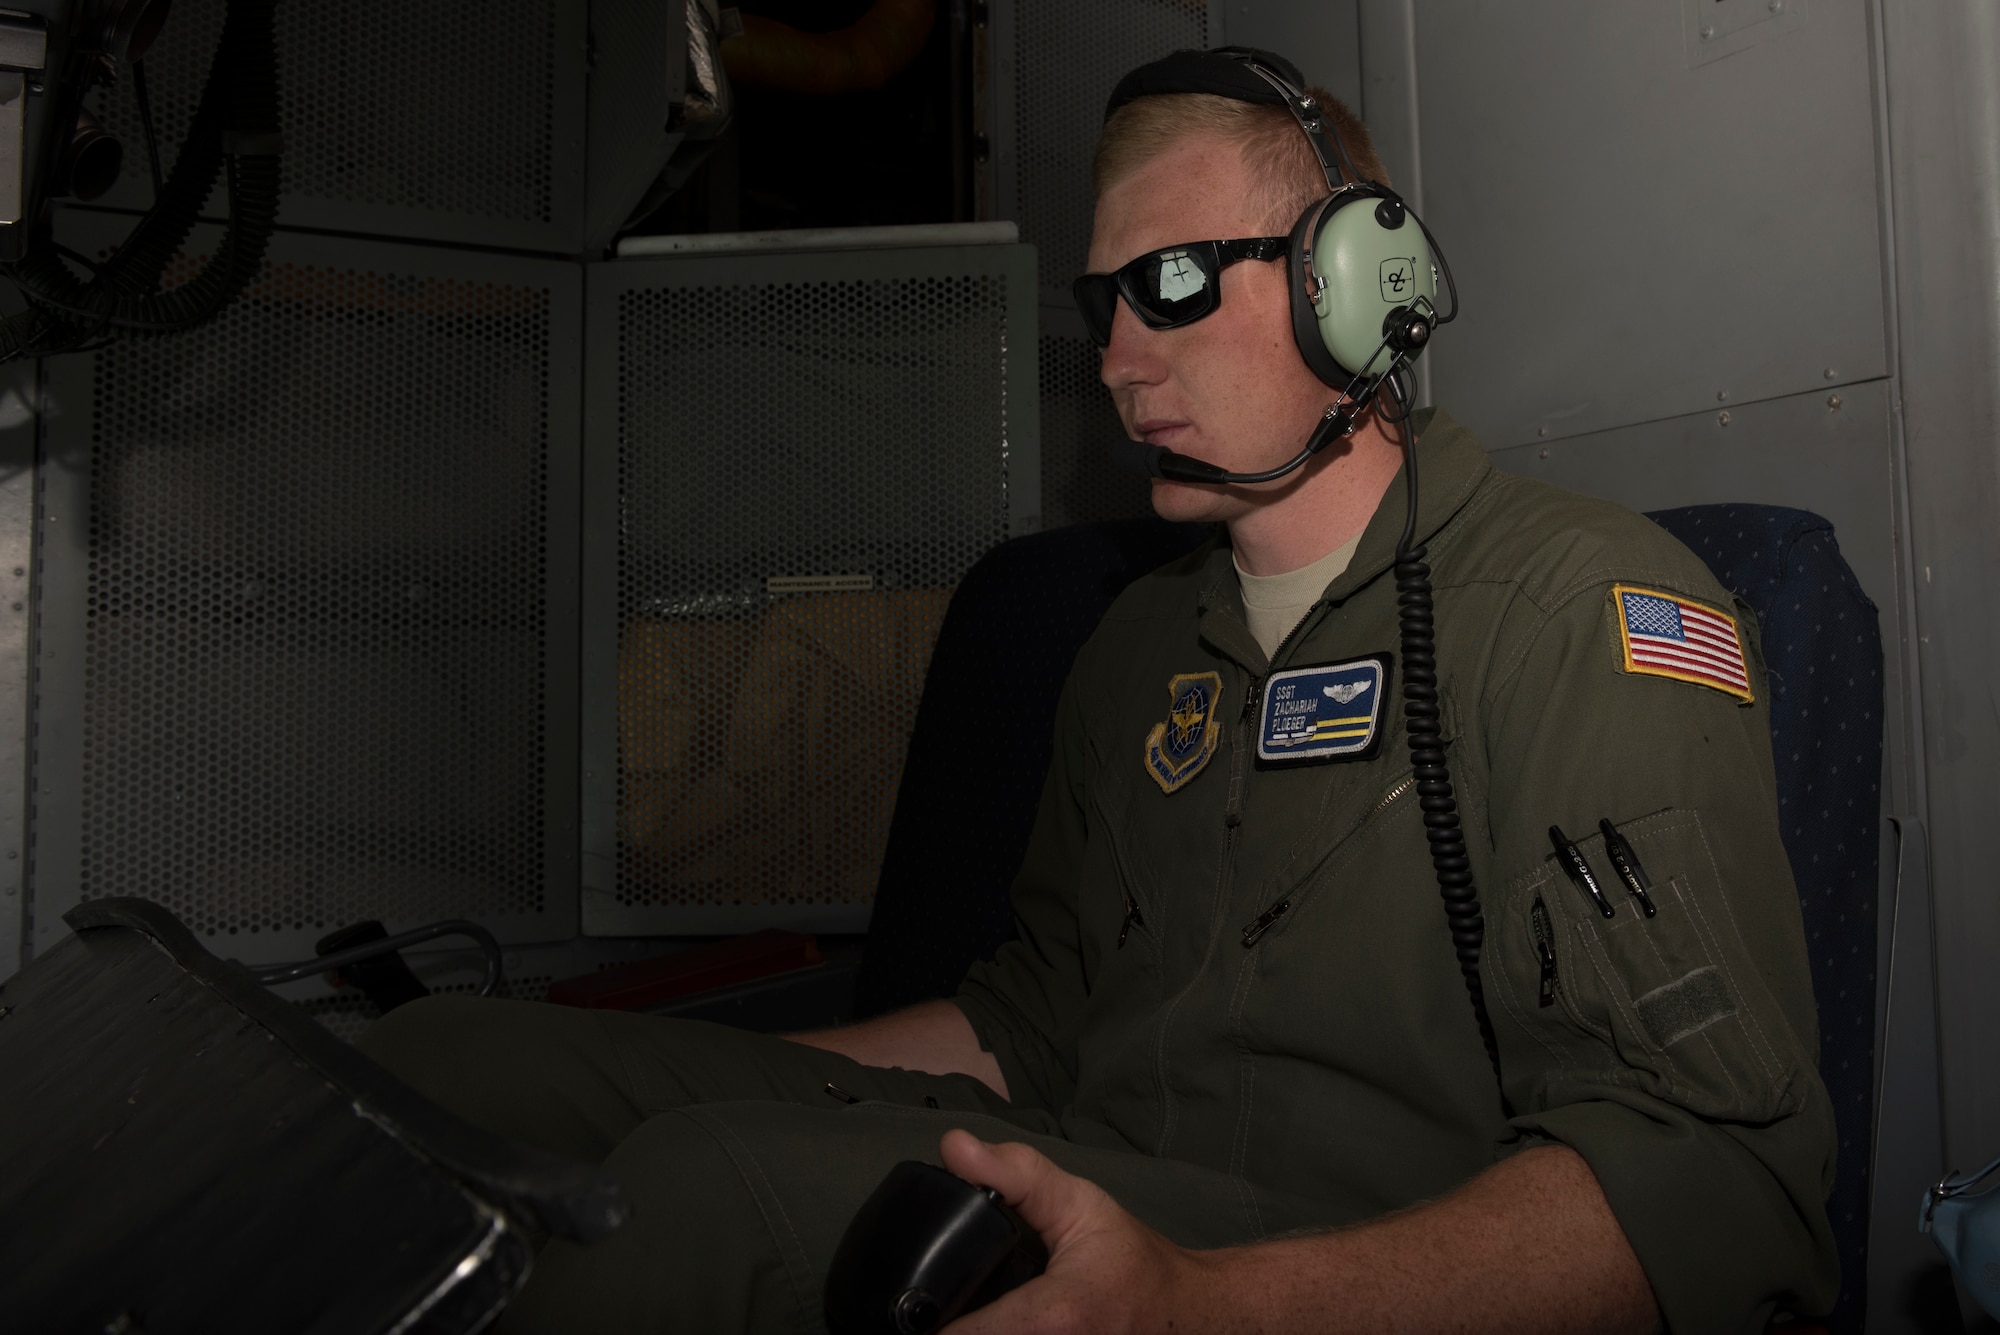 Staff Sgt. Zachariah Ploeger, 6th Air Refueling Squadron boom operator, refuels an F-15 during a mission in the Indo-Pacific theater June 4, 2018. The boom operator is responsible for ensuring safe refueling with receiver aircraft thousands of feet above Earth. Ploeger refueled eight fighter aircraft from the United States and Japan during the five-day mission. (U.S. Air Force photo by Tech. Sgt. James Hodgman)